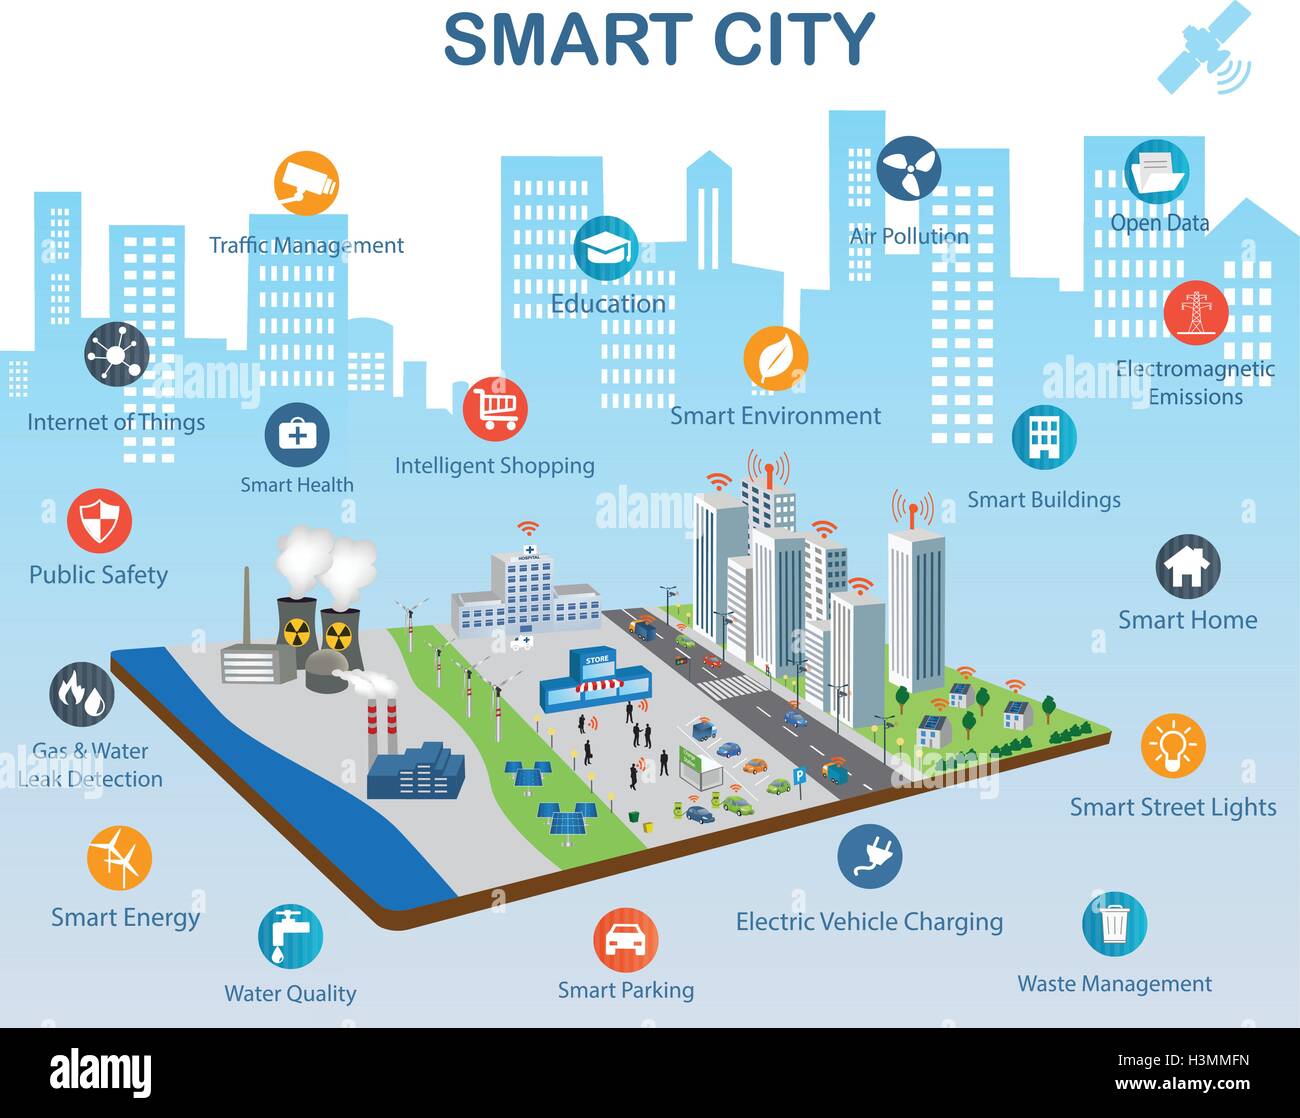 Smart city concept with different icon and elements. Modern city design with future technology for living. Stock Vector